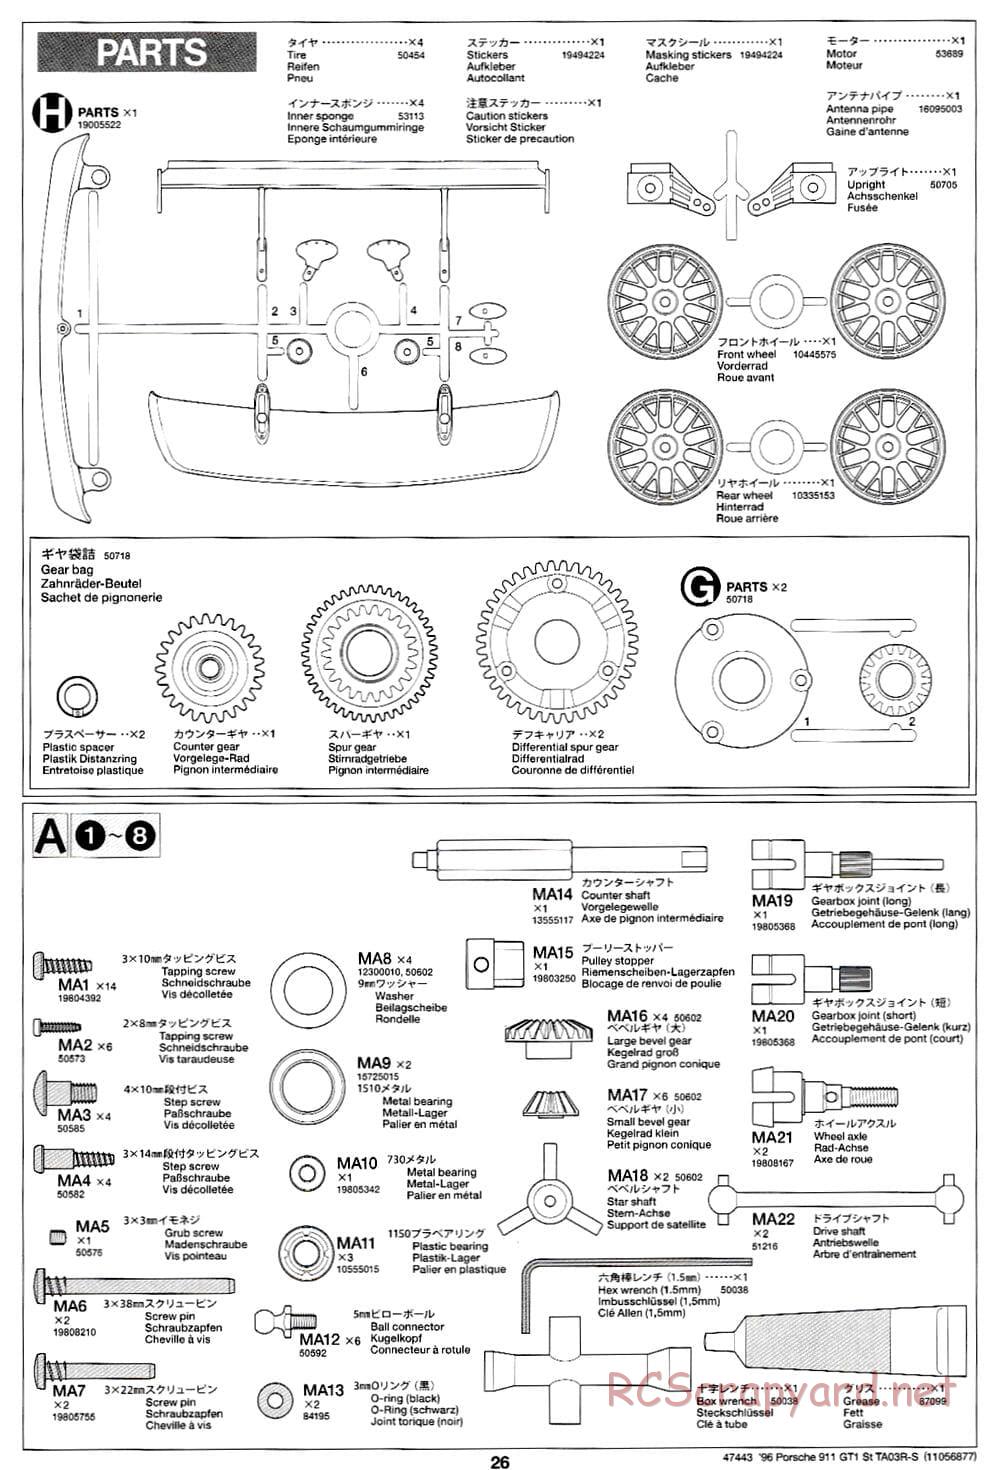 Tamiya - Porsche 911 GT1 Street - TA-03RS Chassis - Manual - Page 26